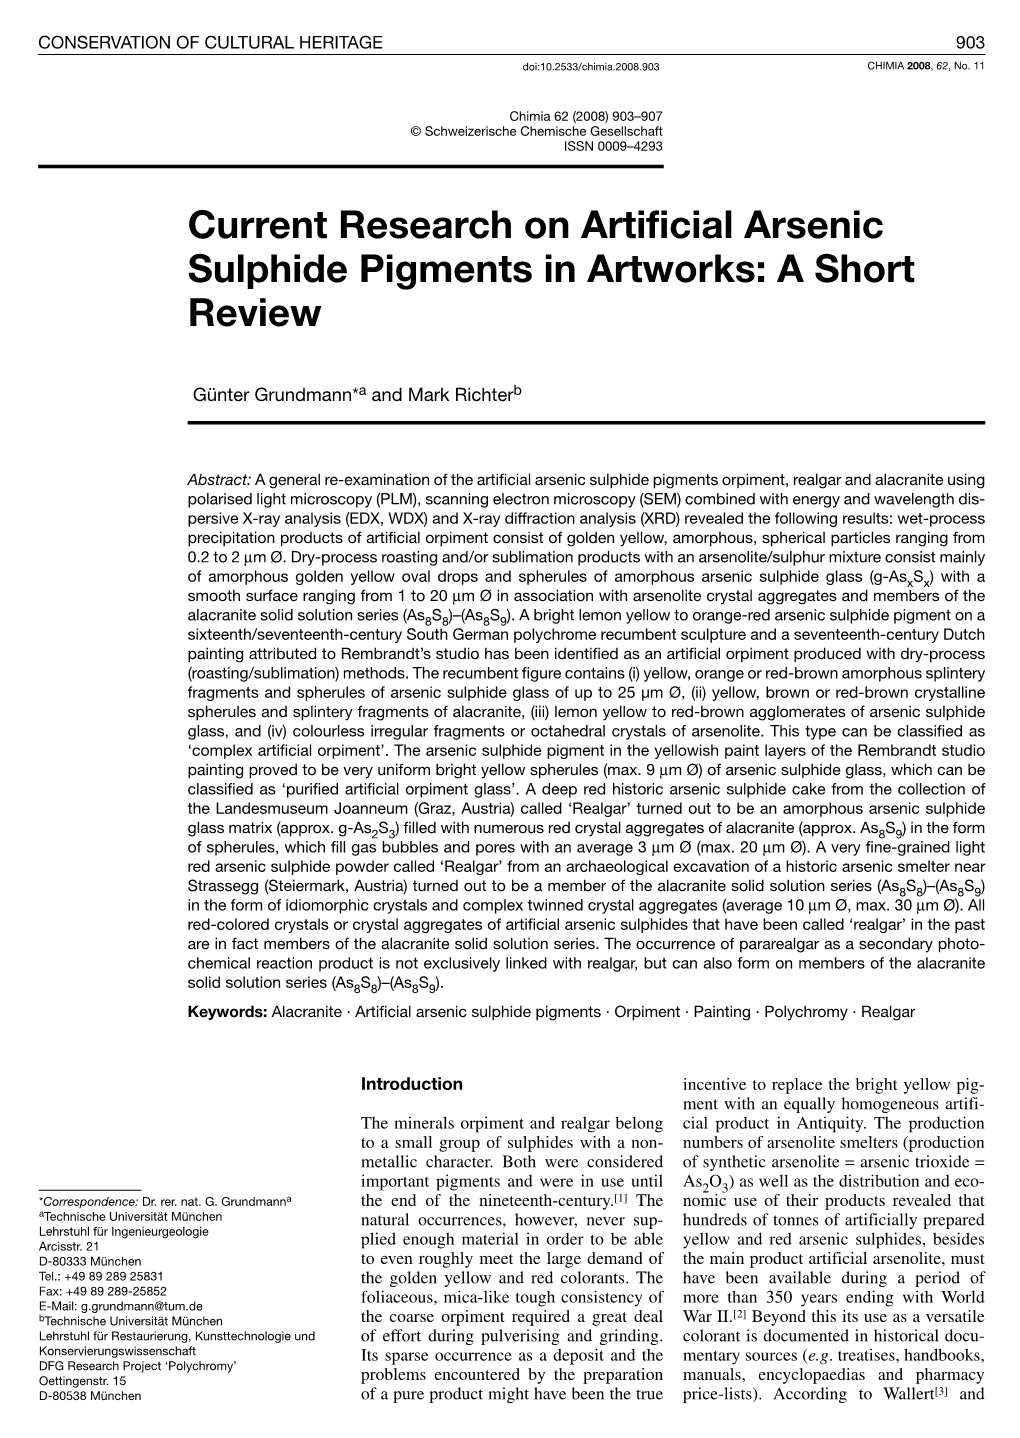 Current Research on Artificial Arsenic Sulphide Pigments in Artworks: Ashort Review